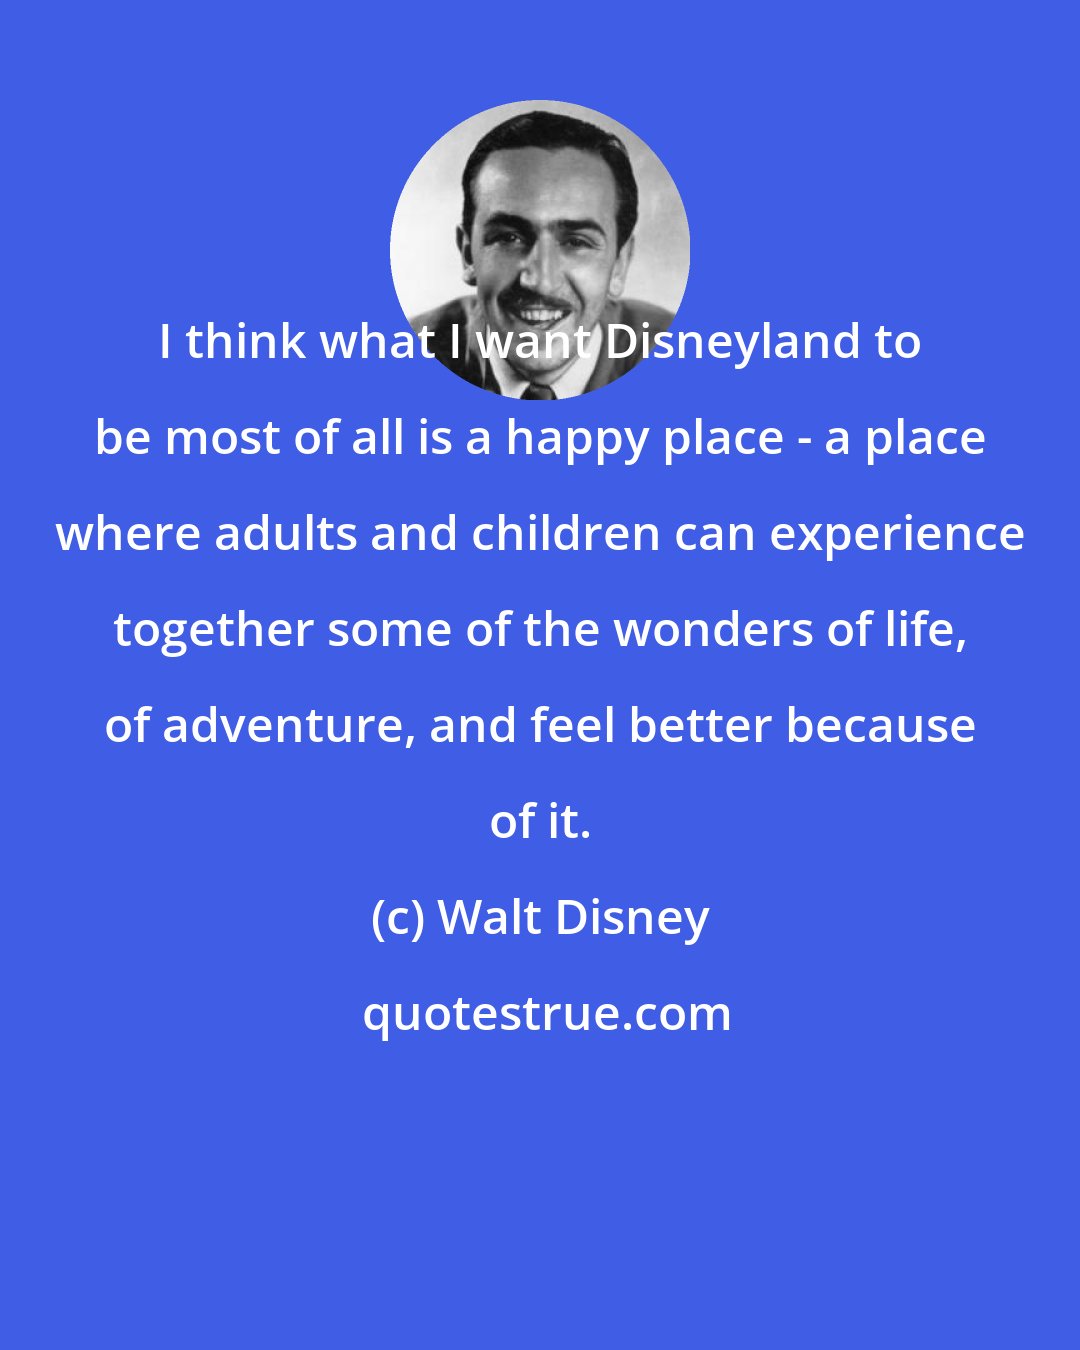 Walt Disney: I think what I want Disneyland to be most of all is a happy place - a place where adults and children can experience together some of the wonders of life, of adventure, and feel better because of it.